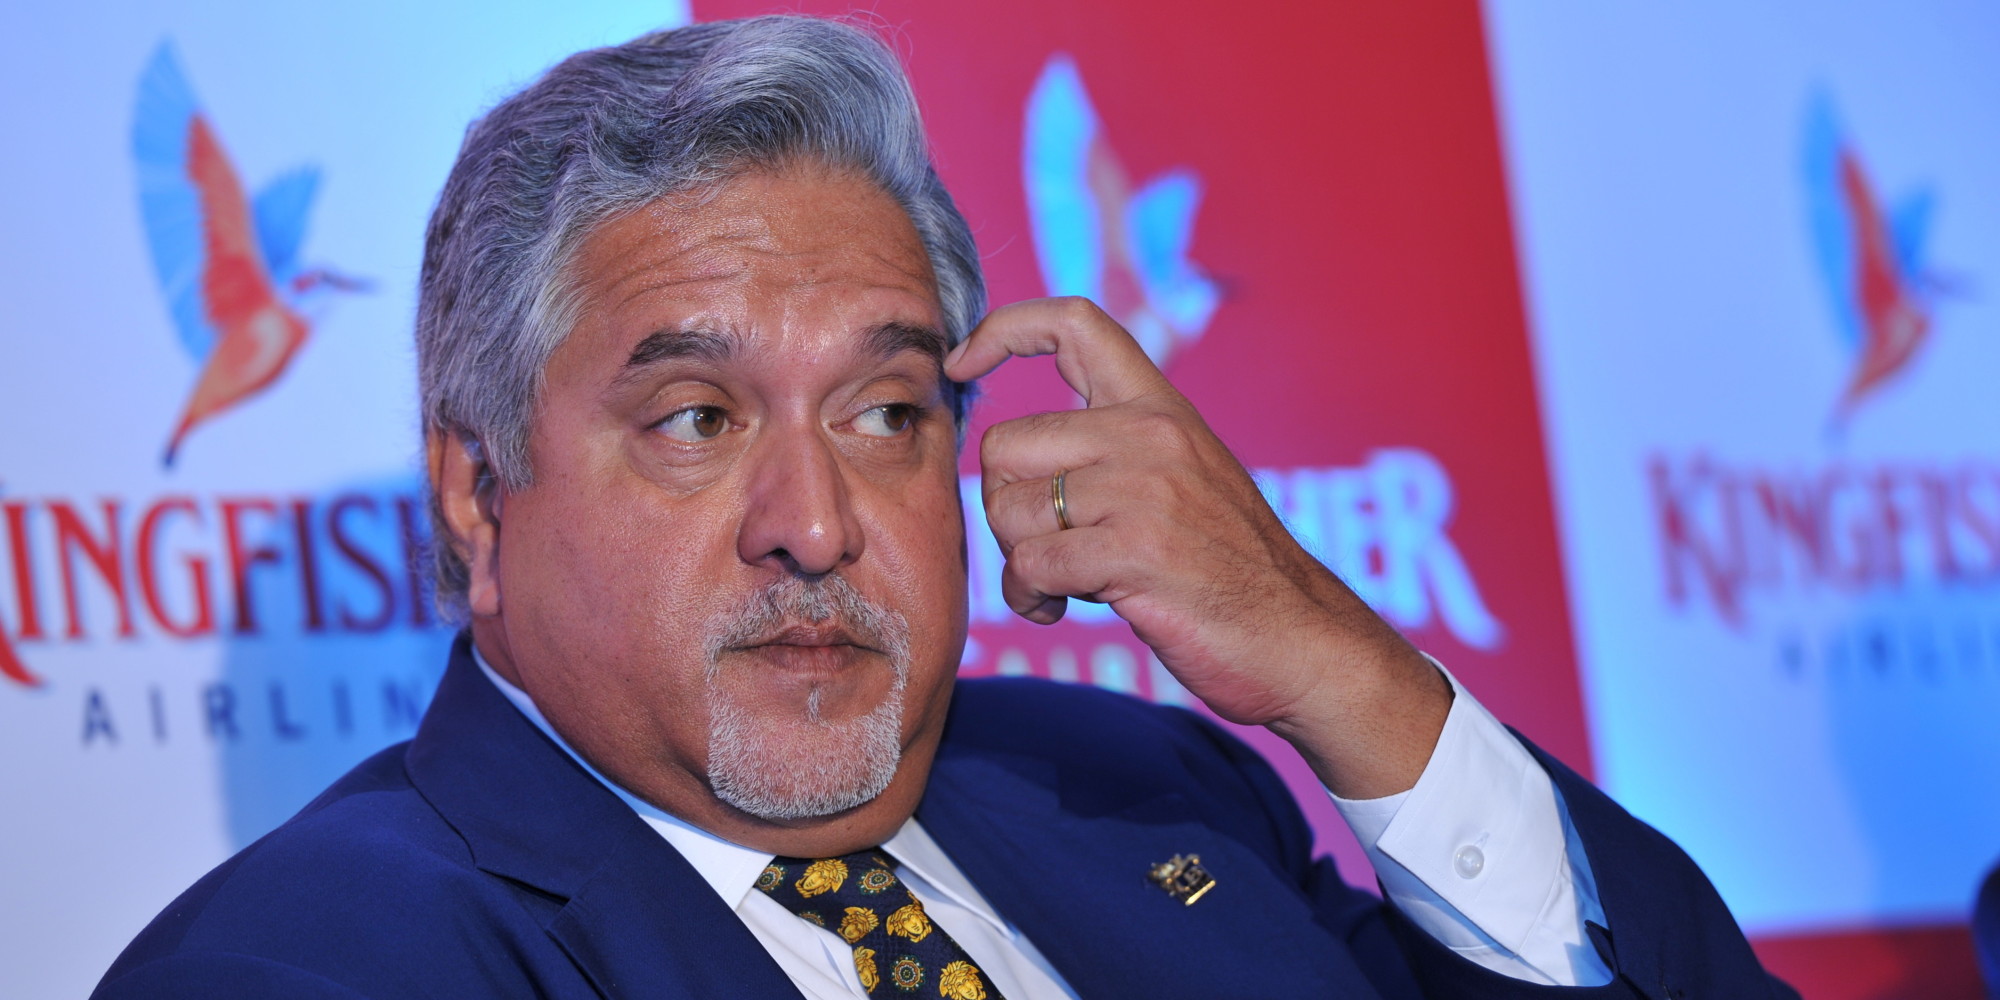 Business vijay Mallya to show his property, Mallya's turn over, owner of kingfisher, Mallya refuses to disclose his assets, India